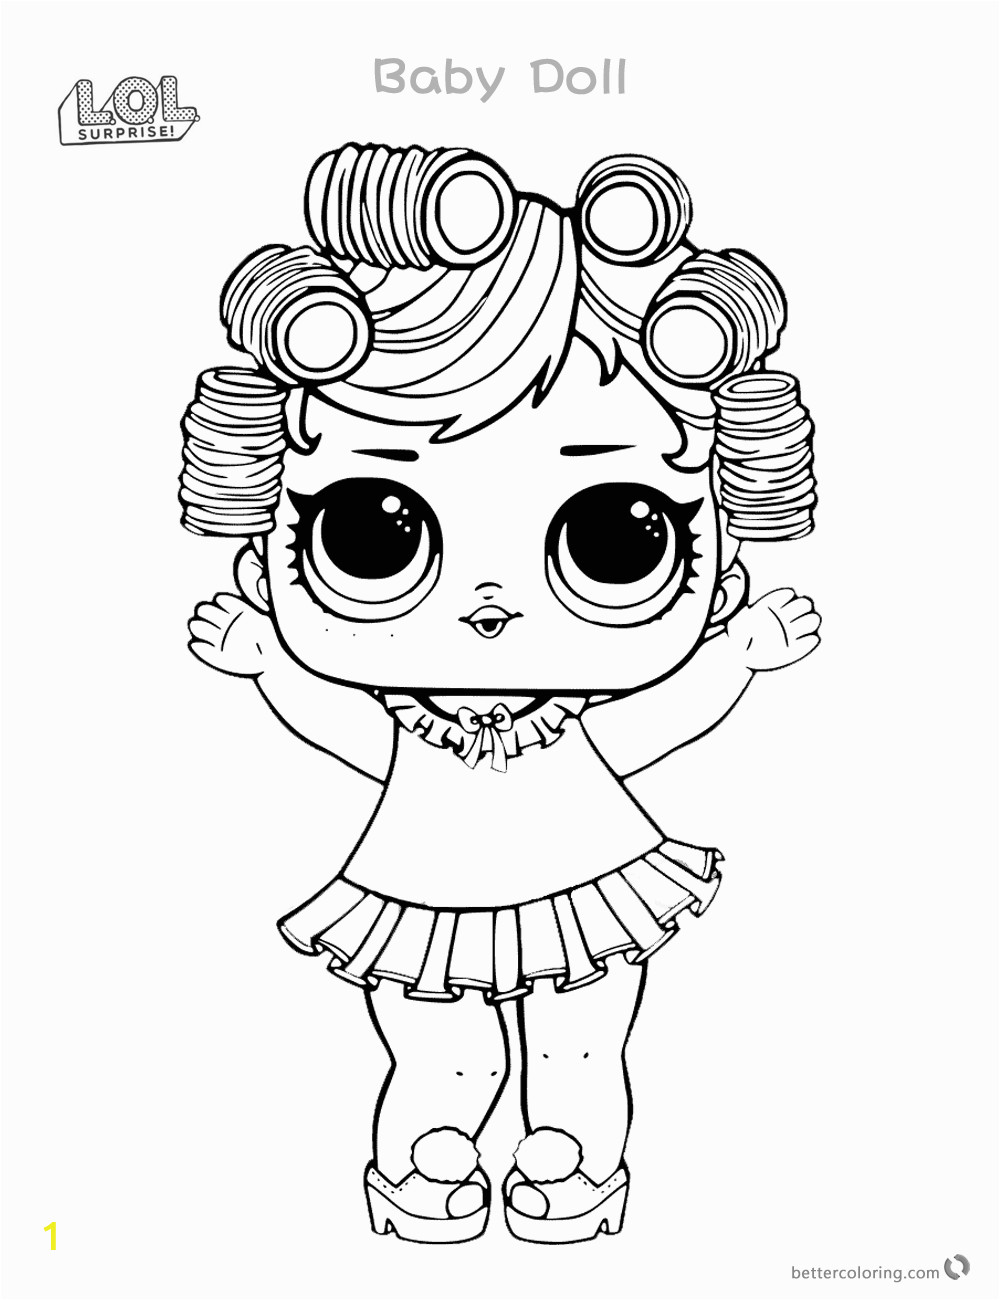 babydoll from surprise doll coloring pages series 3